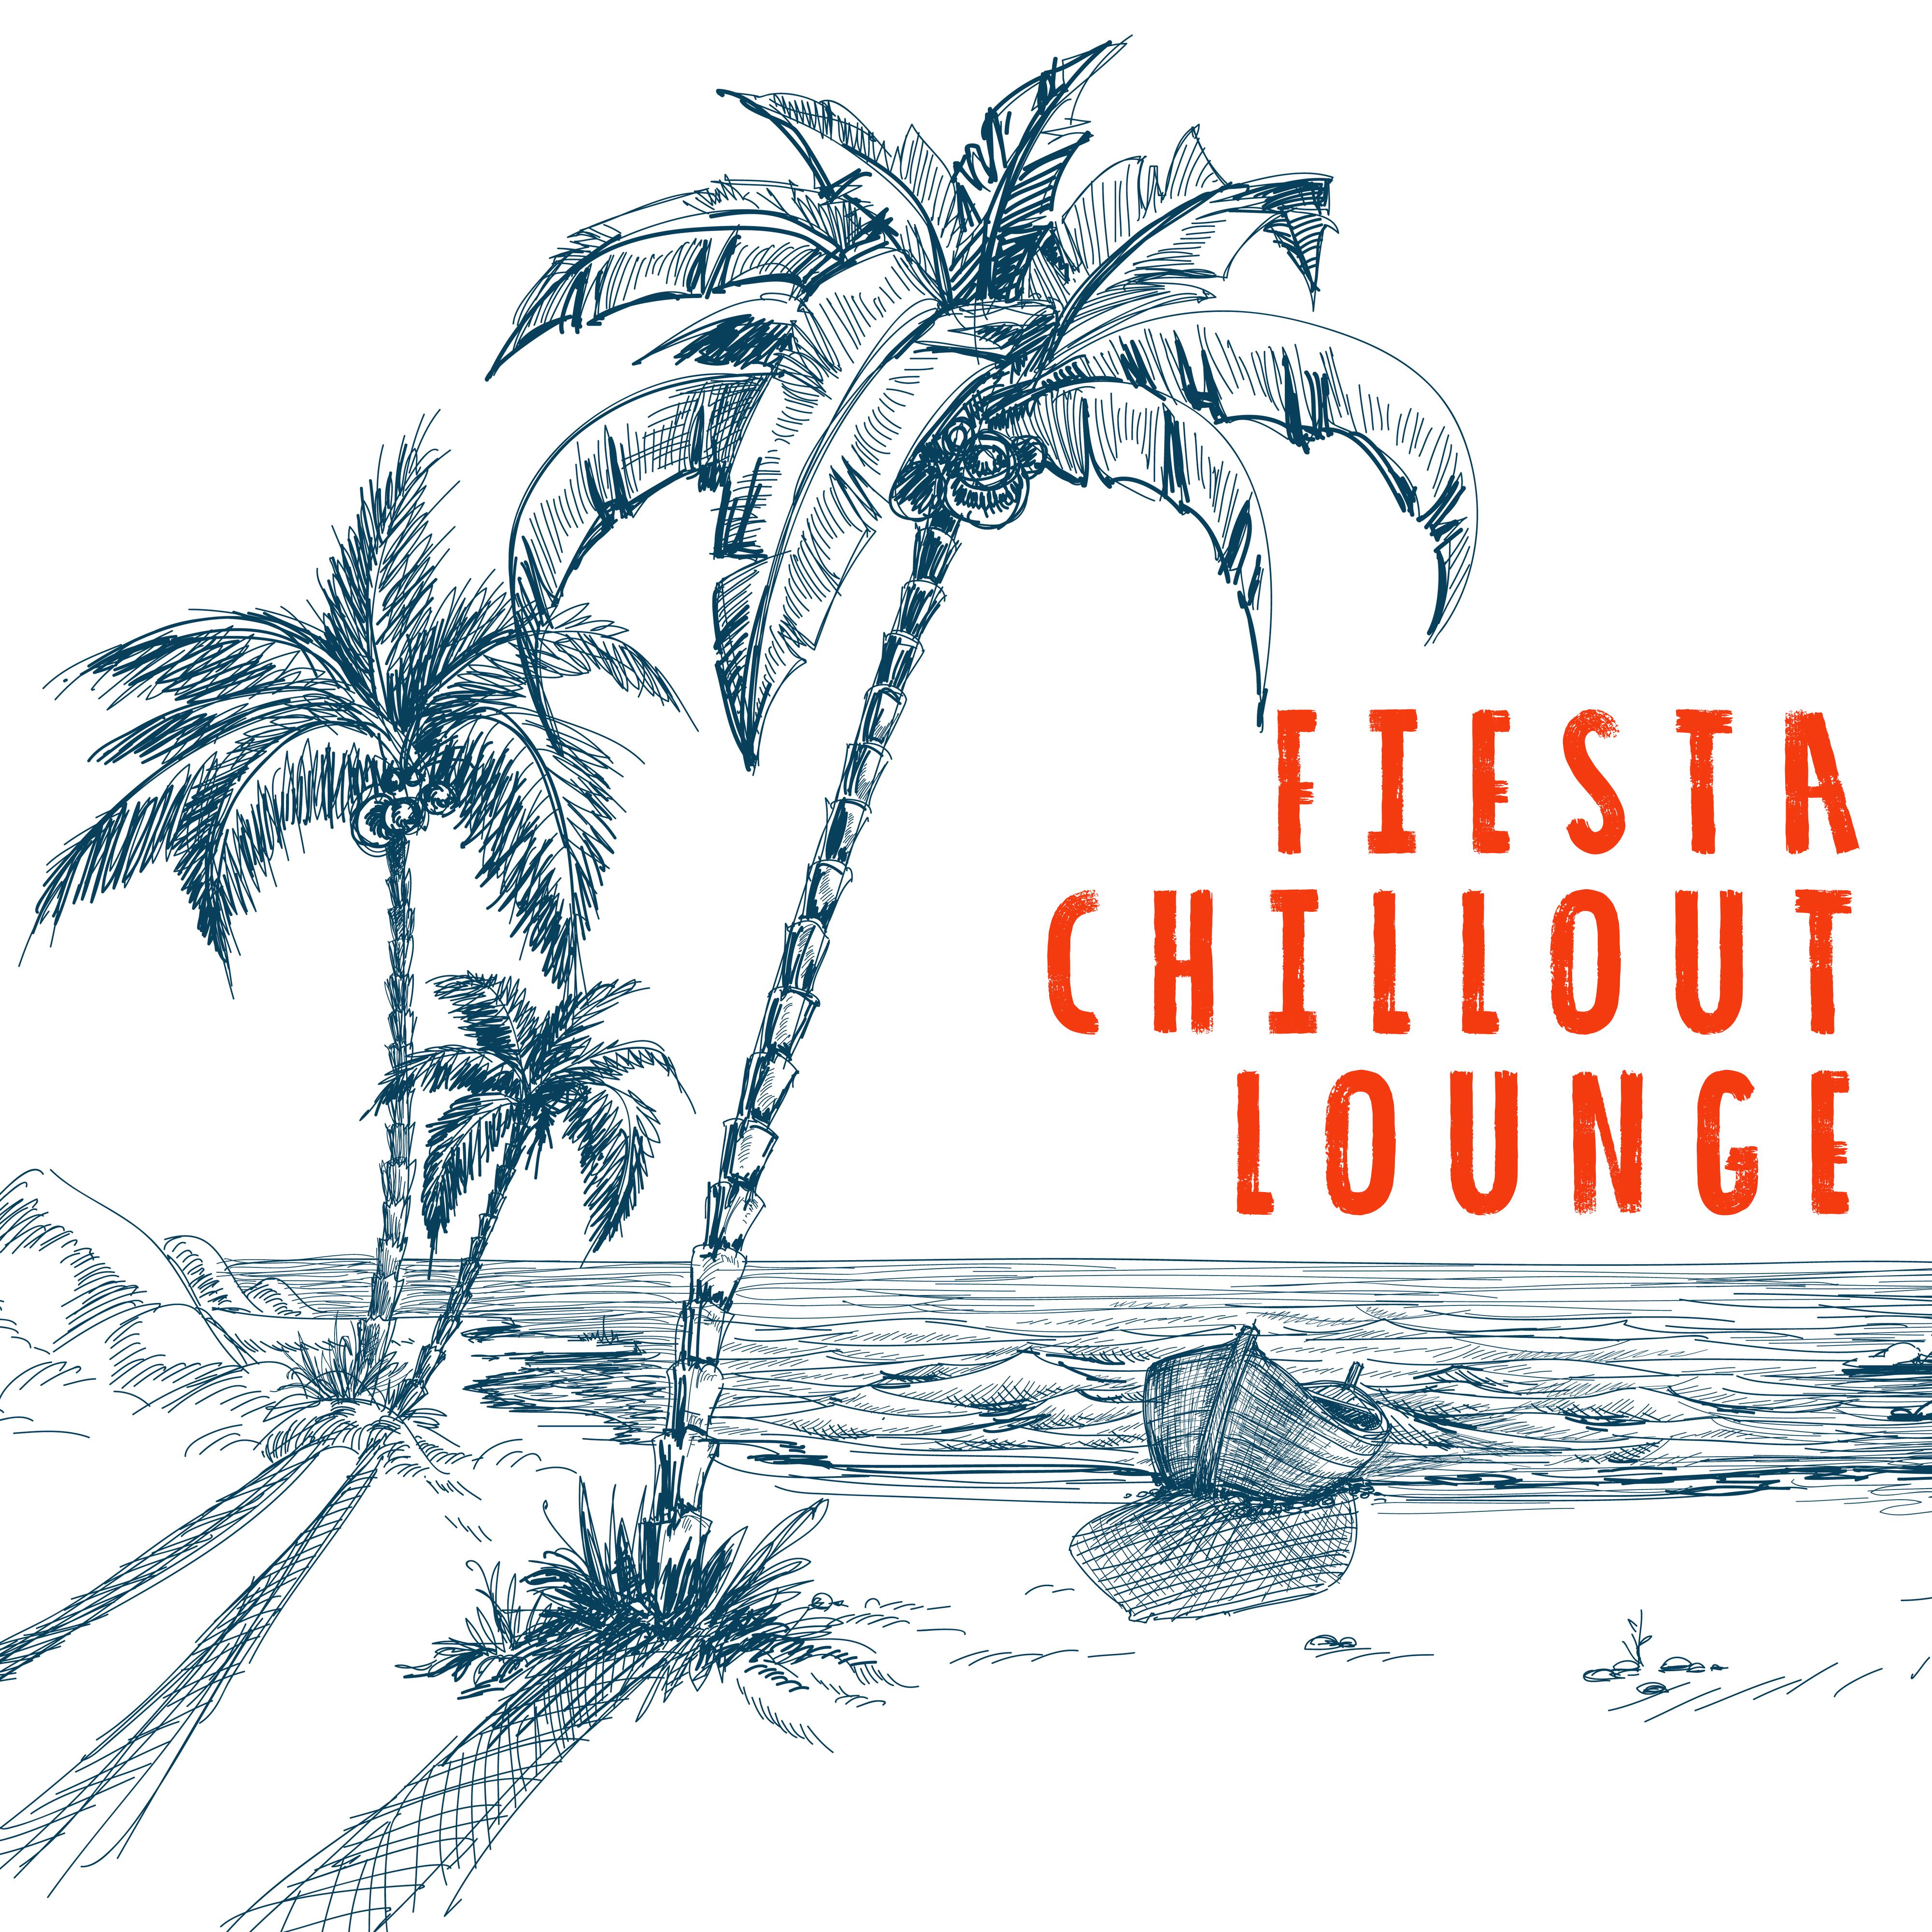 Fiesta Chillout Lounge: Collection of Best Relaxation Chill Out Music in 2019, Deep Slow Beats & Ambient Sensual Melodies, Songs Created for Total Relax, Full Rest, Calm Down